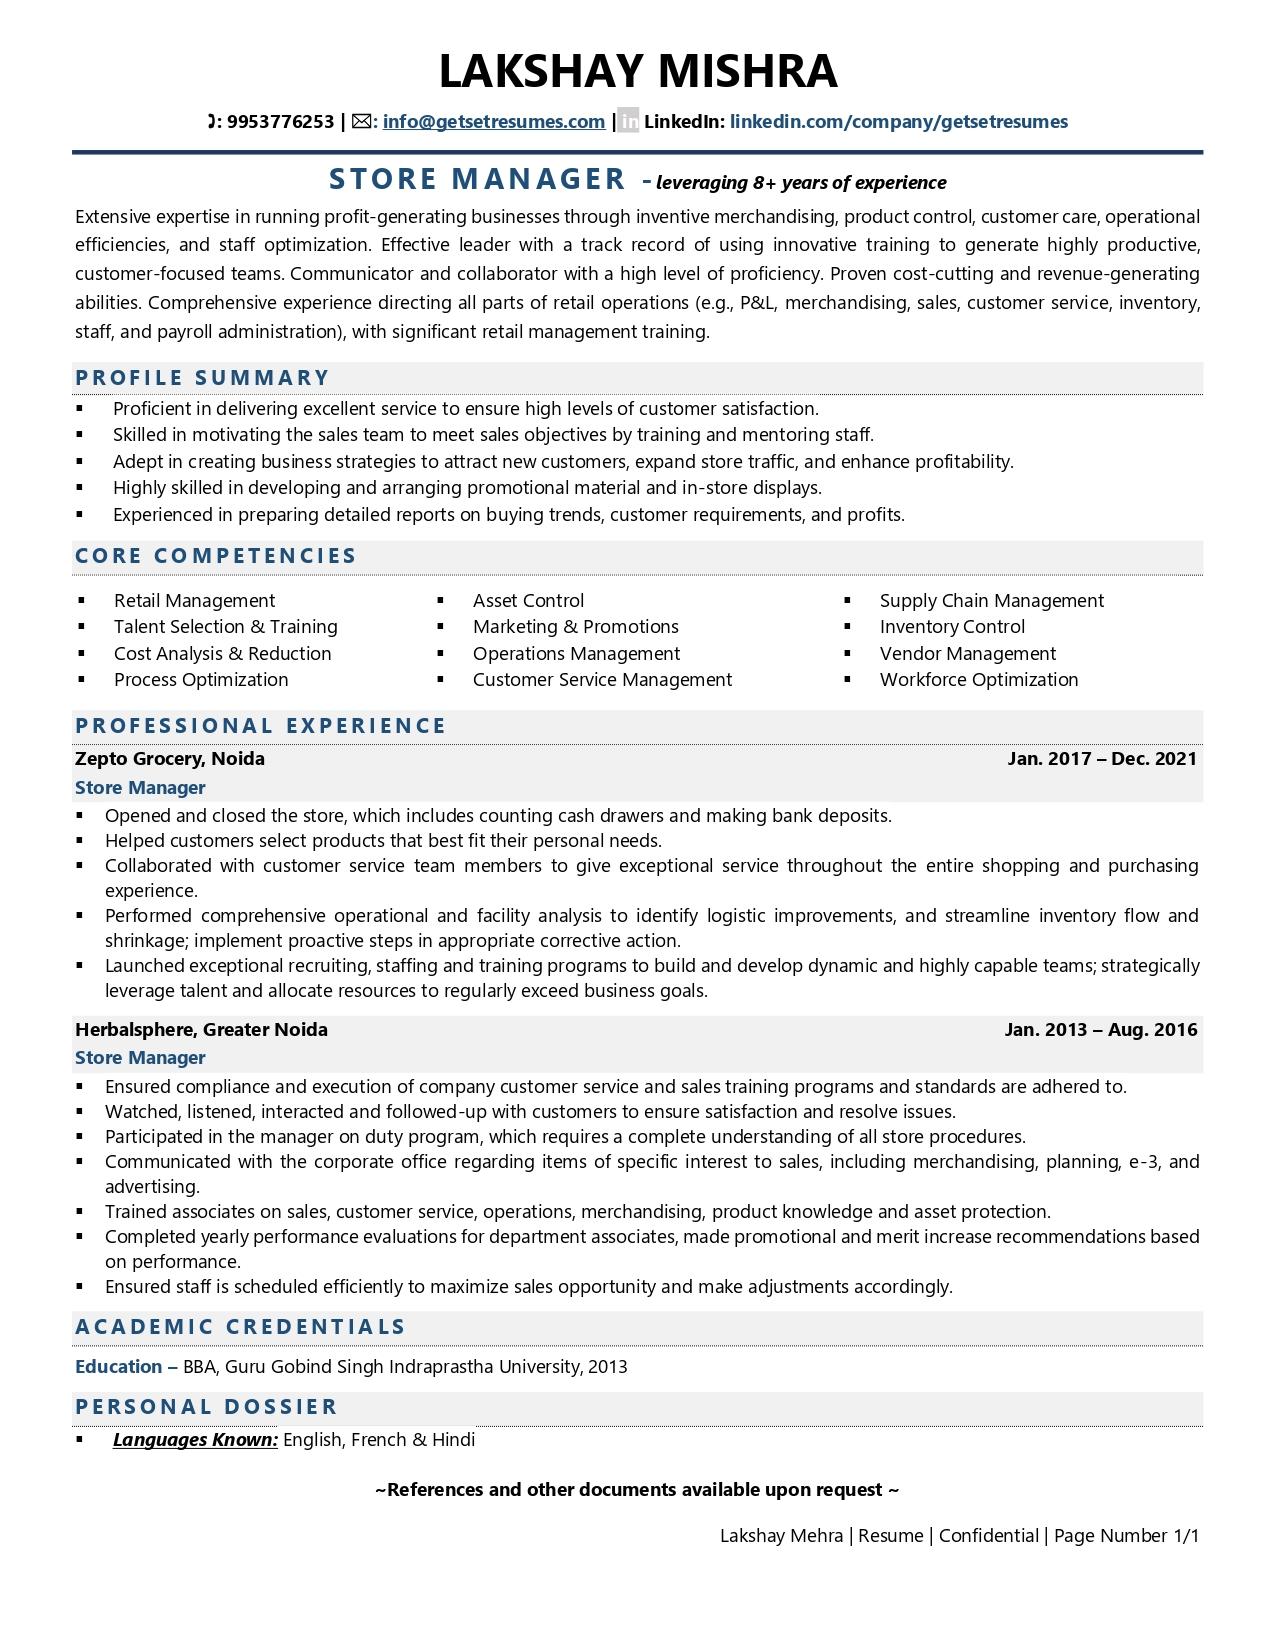 Store Manager Resume Examples & Template (with job winning tips)